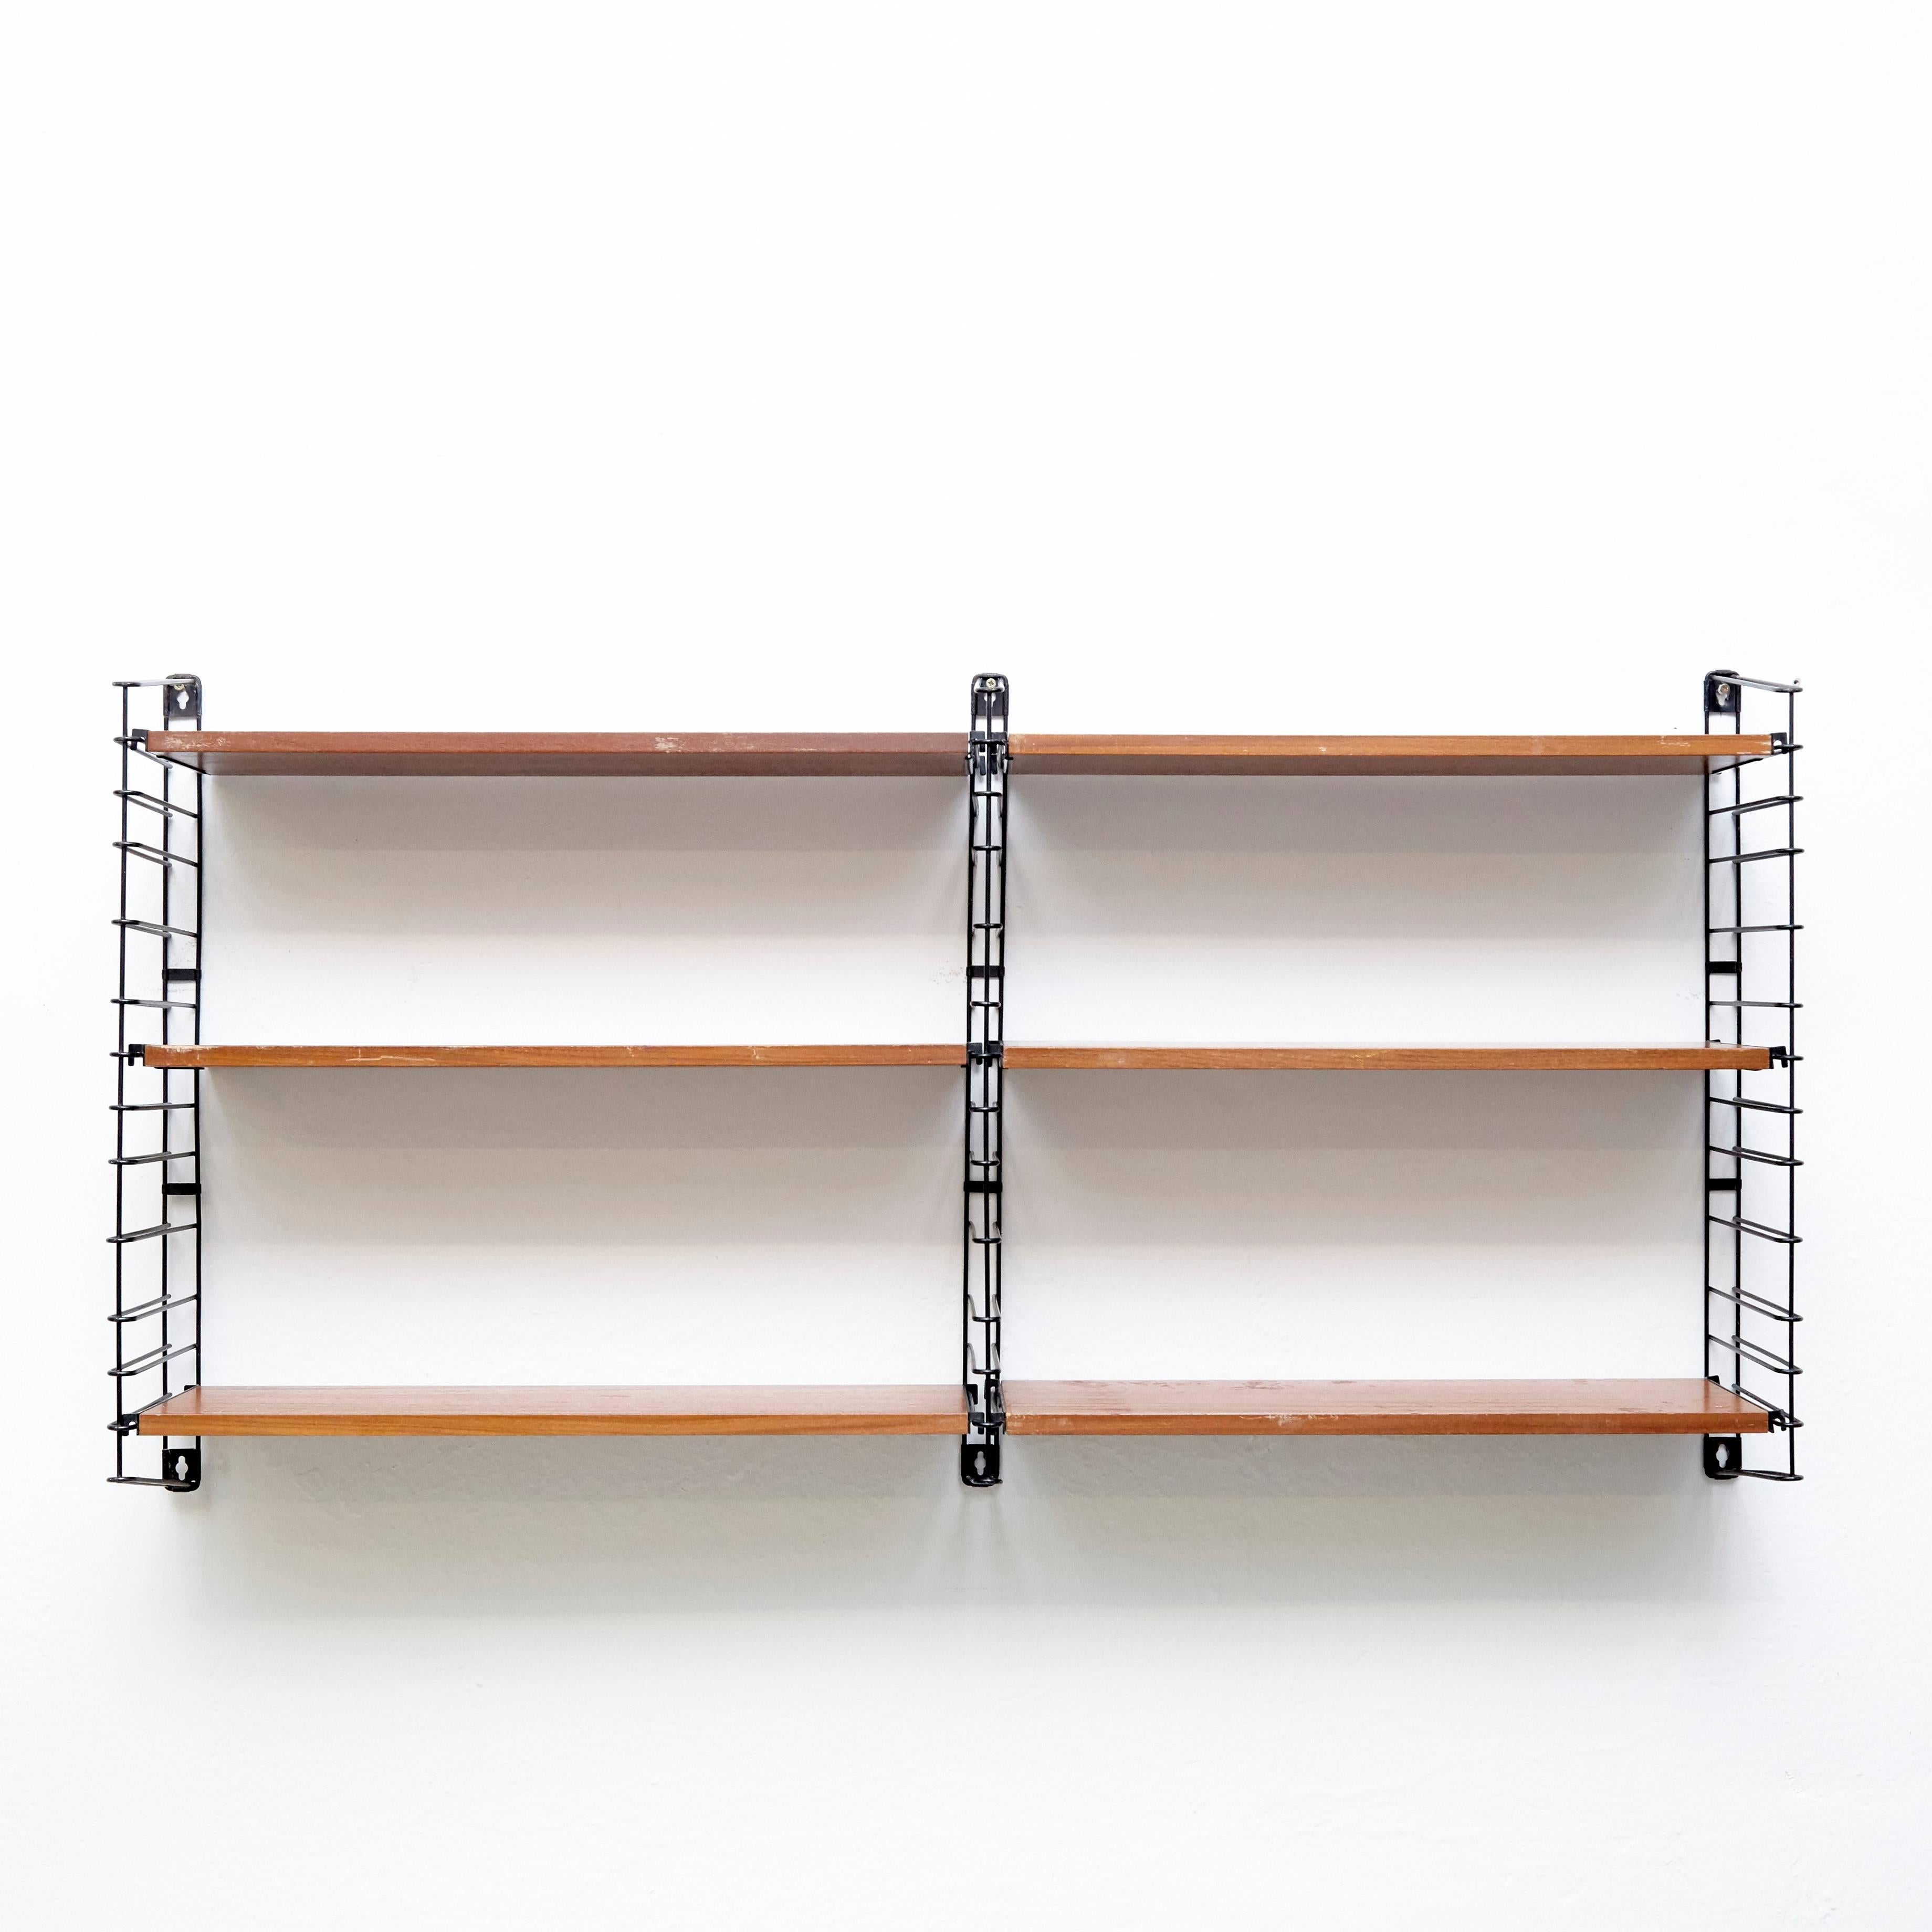 Modular Shelves designed by Adriaan D. Dekker in 1958.
Manufactured by Tomado in the Netherlands.

It possible to fit multiple shelves together, thus achieving a personalized/modular shelving system.

In good original condition with minor wear